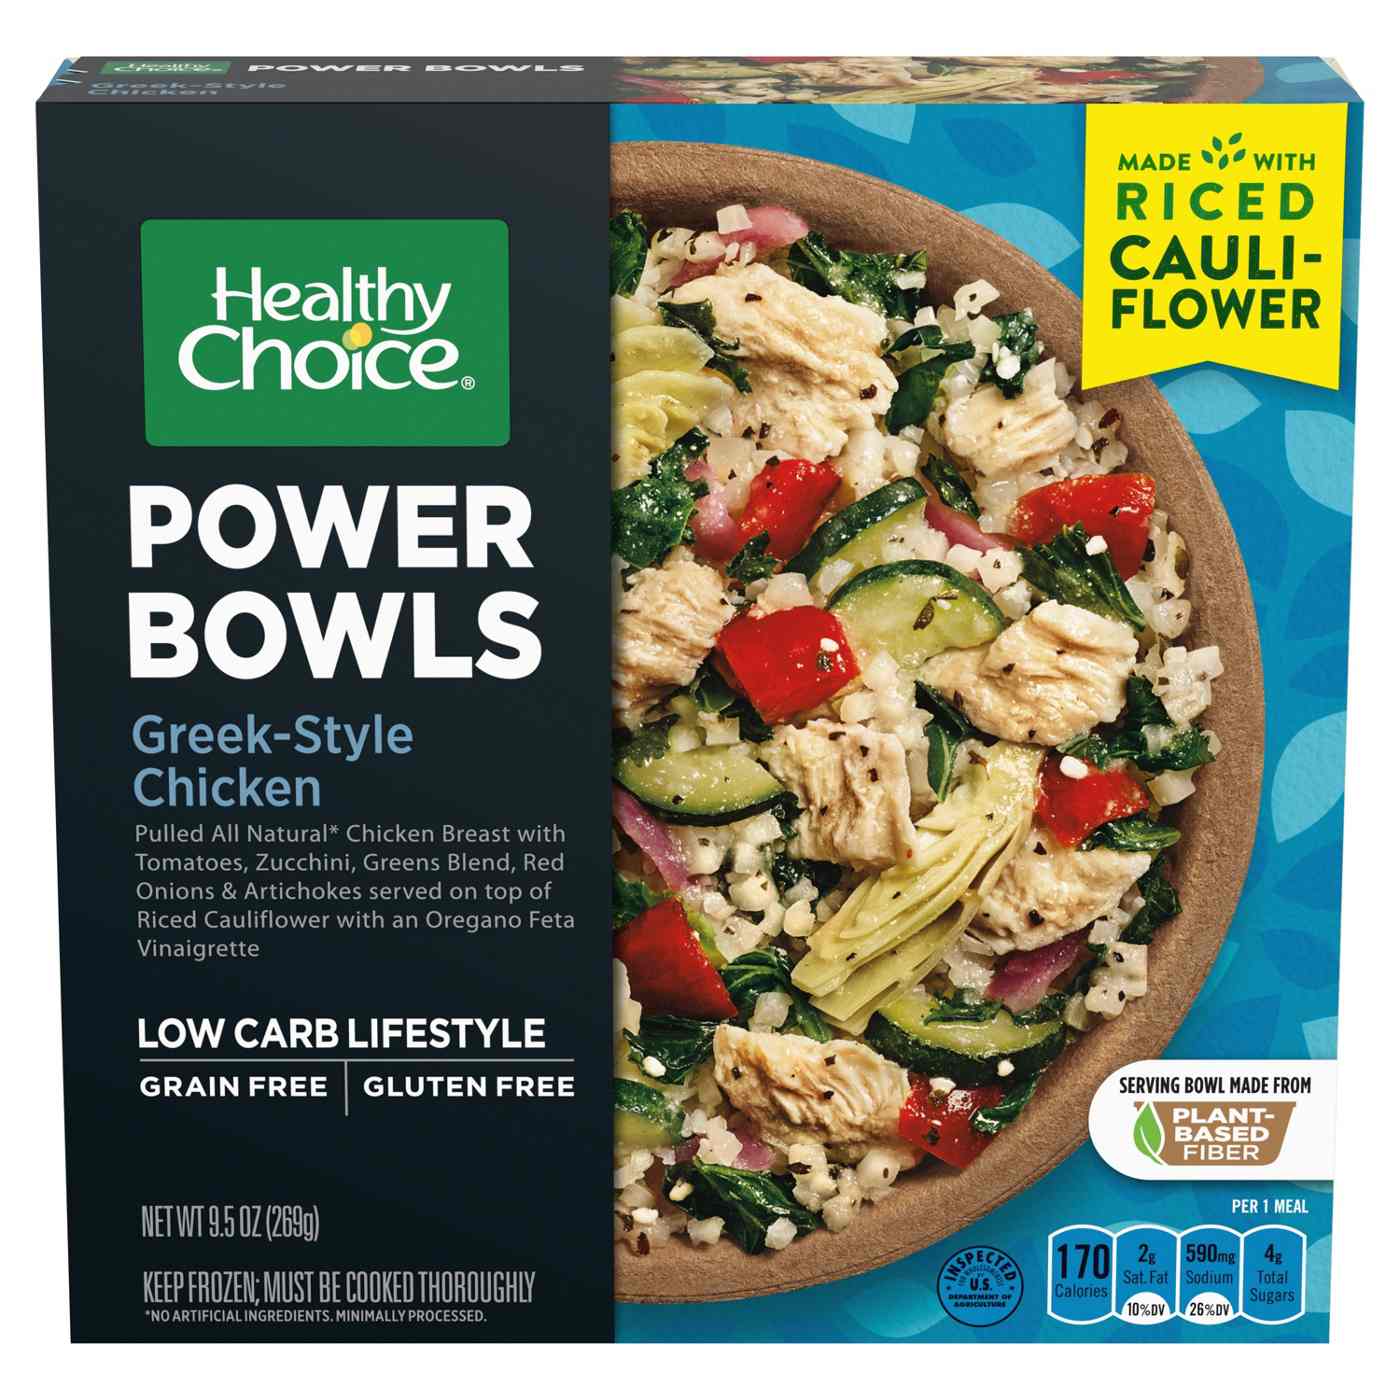 Healthy Choice Power Bowls Greek-Style Chicken Frozen Meal; image 1 of 7